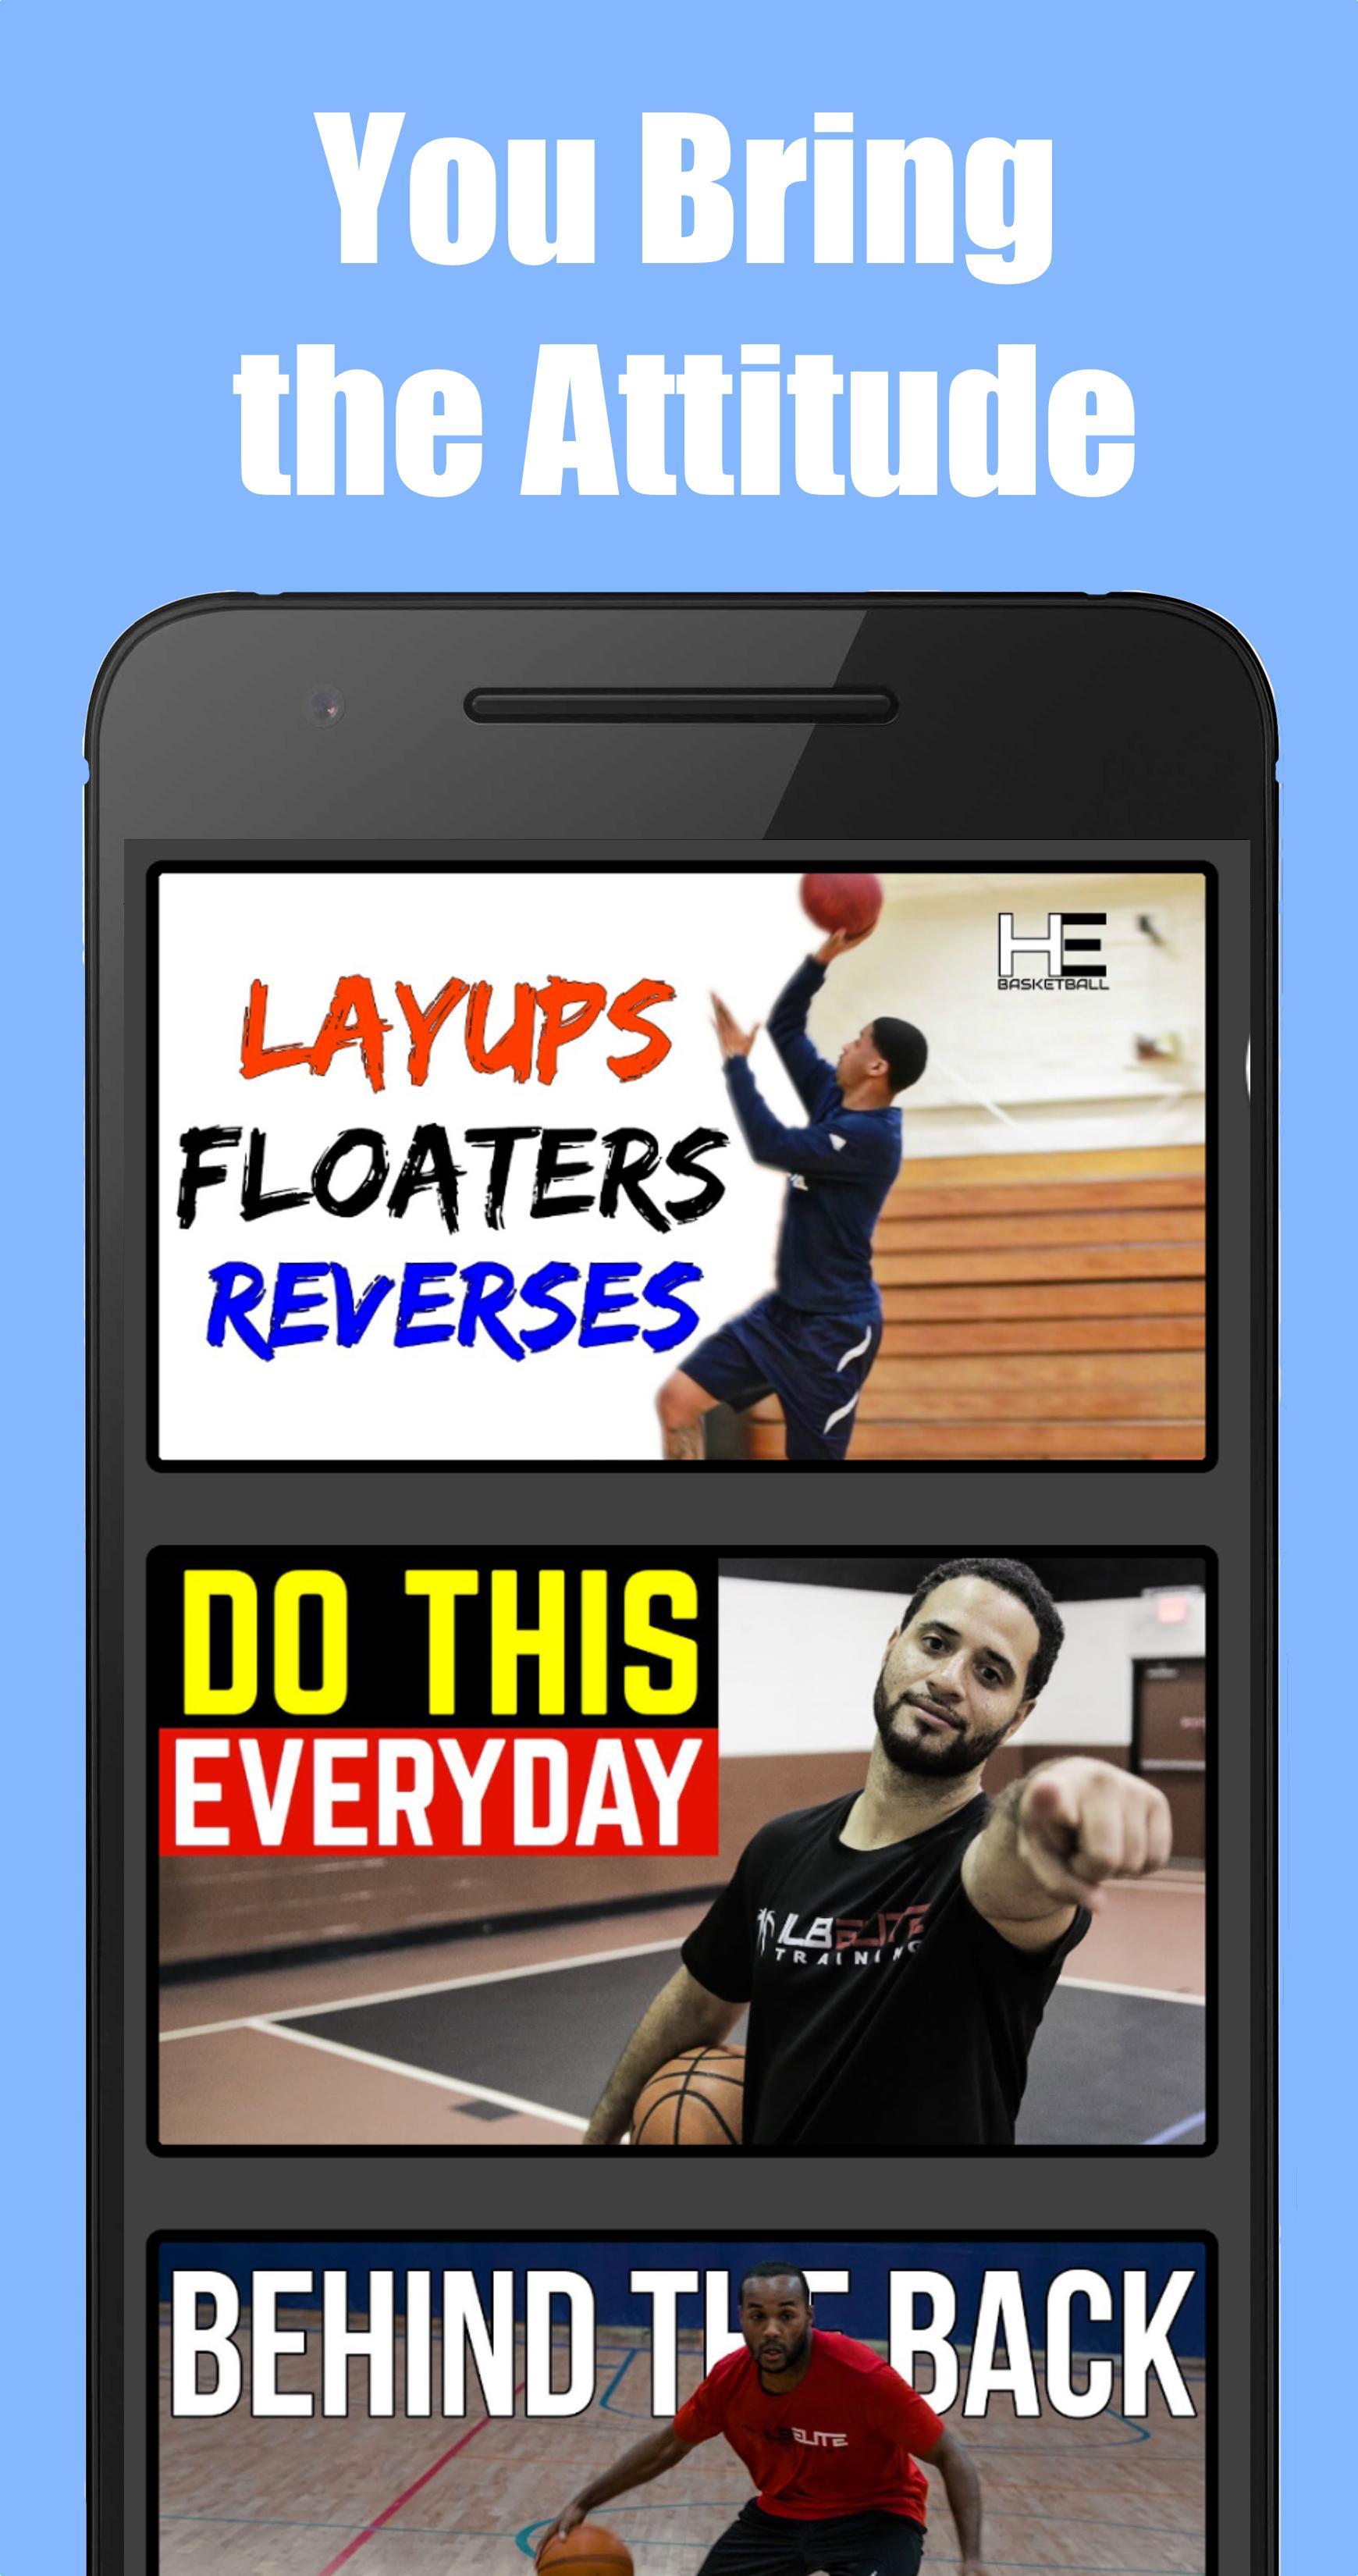 133t Basketball Training | Coaching Skills Drills for Android - APK Download